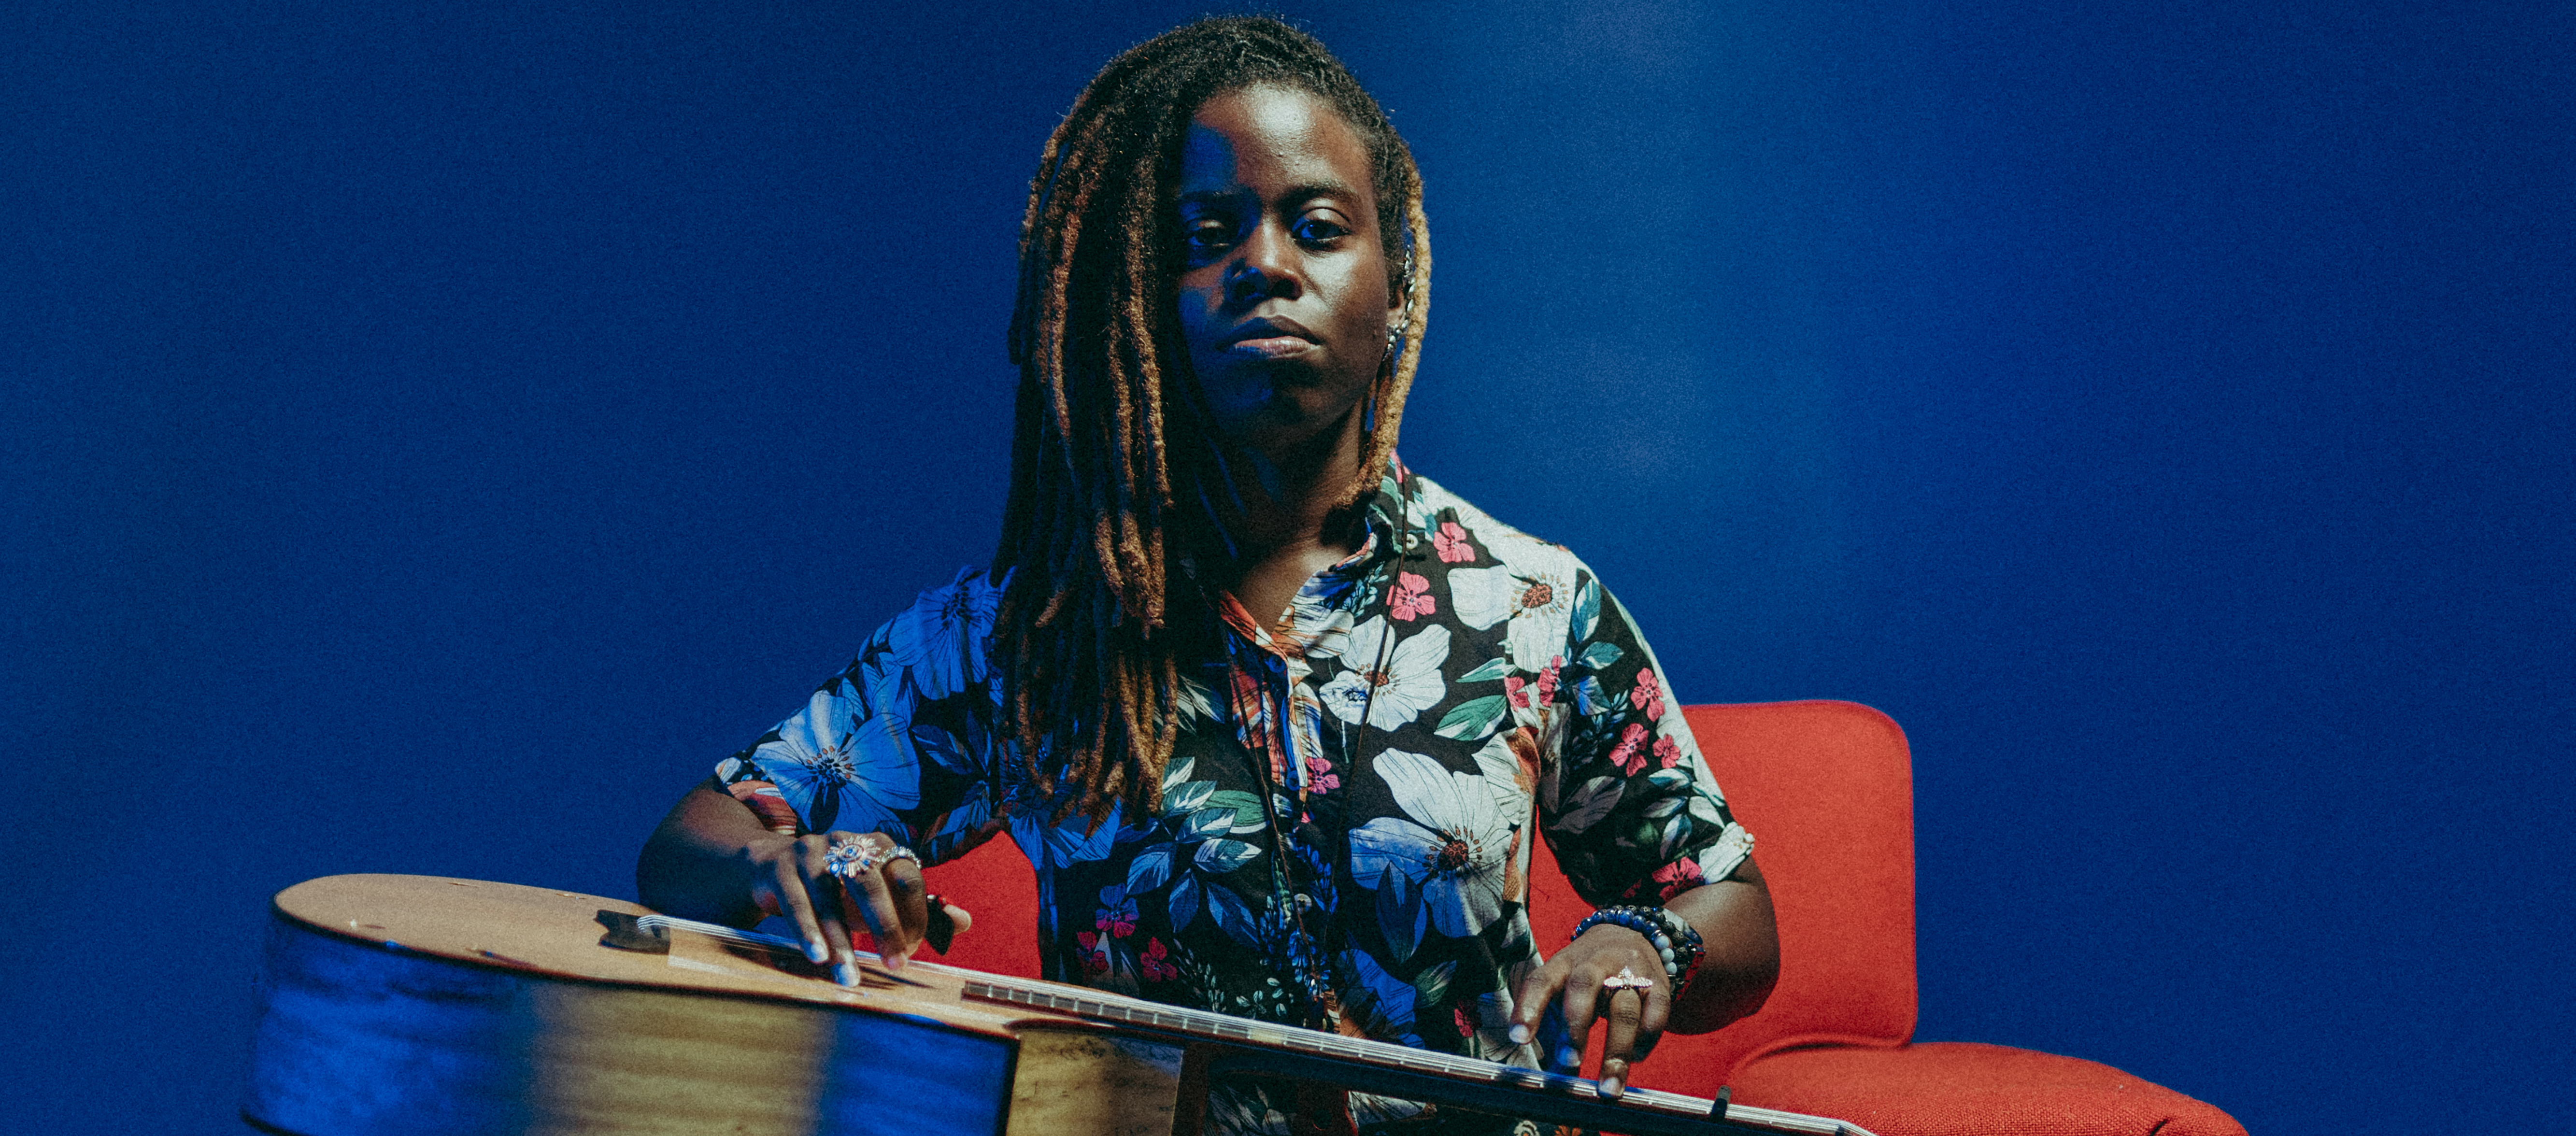 Musician with brown skin and ombre locs wears a floral-patterned outfit and sits on a red chair against a blue background with an acoustic guitar on her lap.